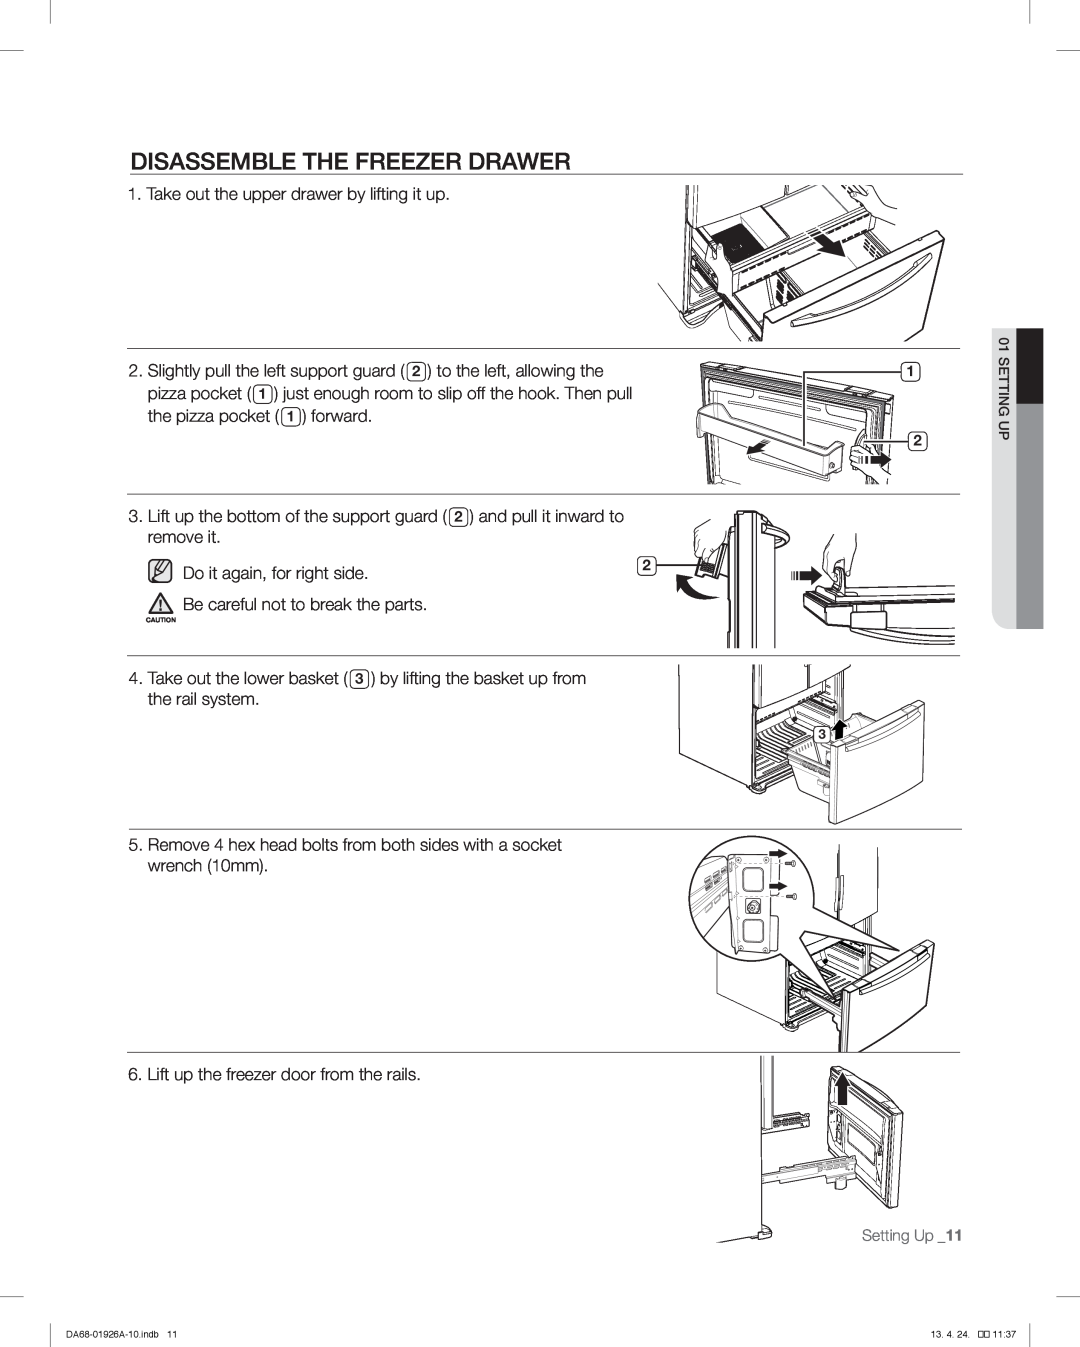 Samsung RFG293HAWP, RFG293HARS user manual Disassemble The Freezer Drawer, Do it again, for right side 